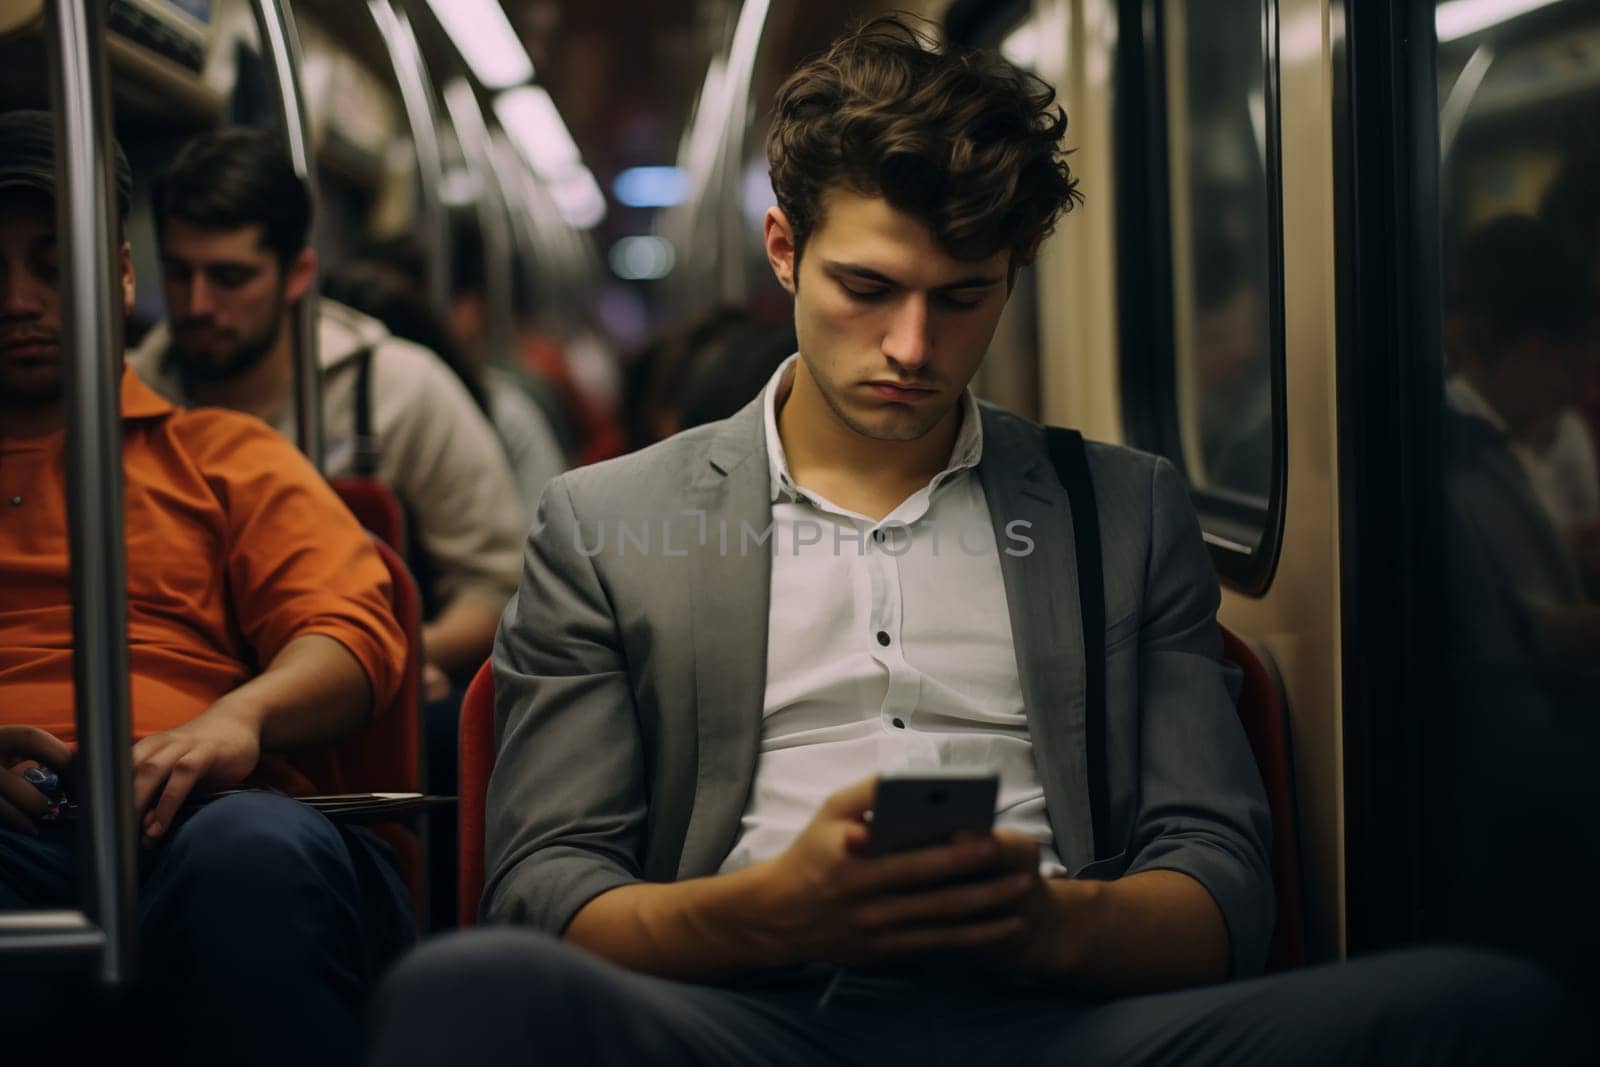 A tired man rides public transportation and holds a smartphone in his hands. Generation Ai